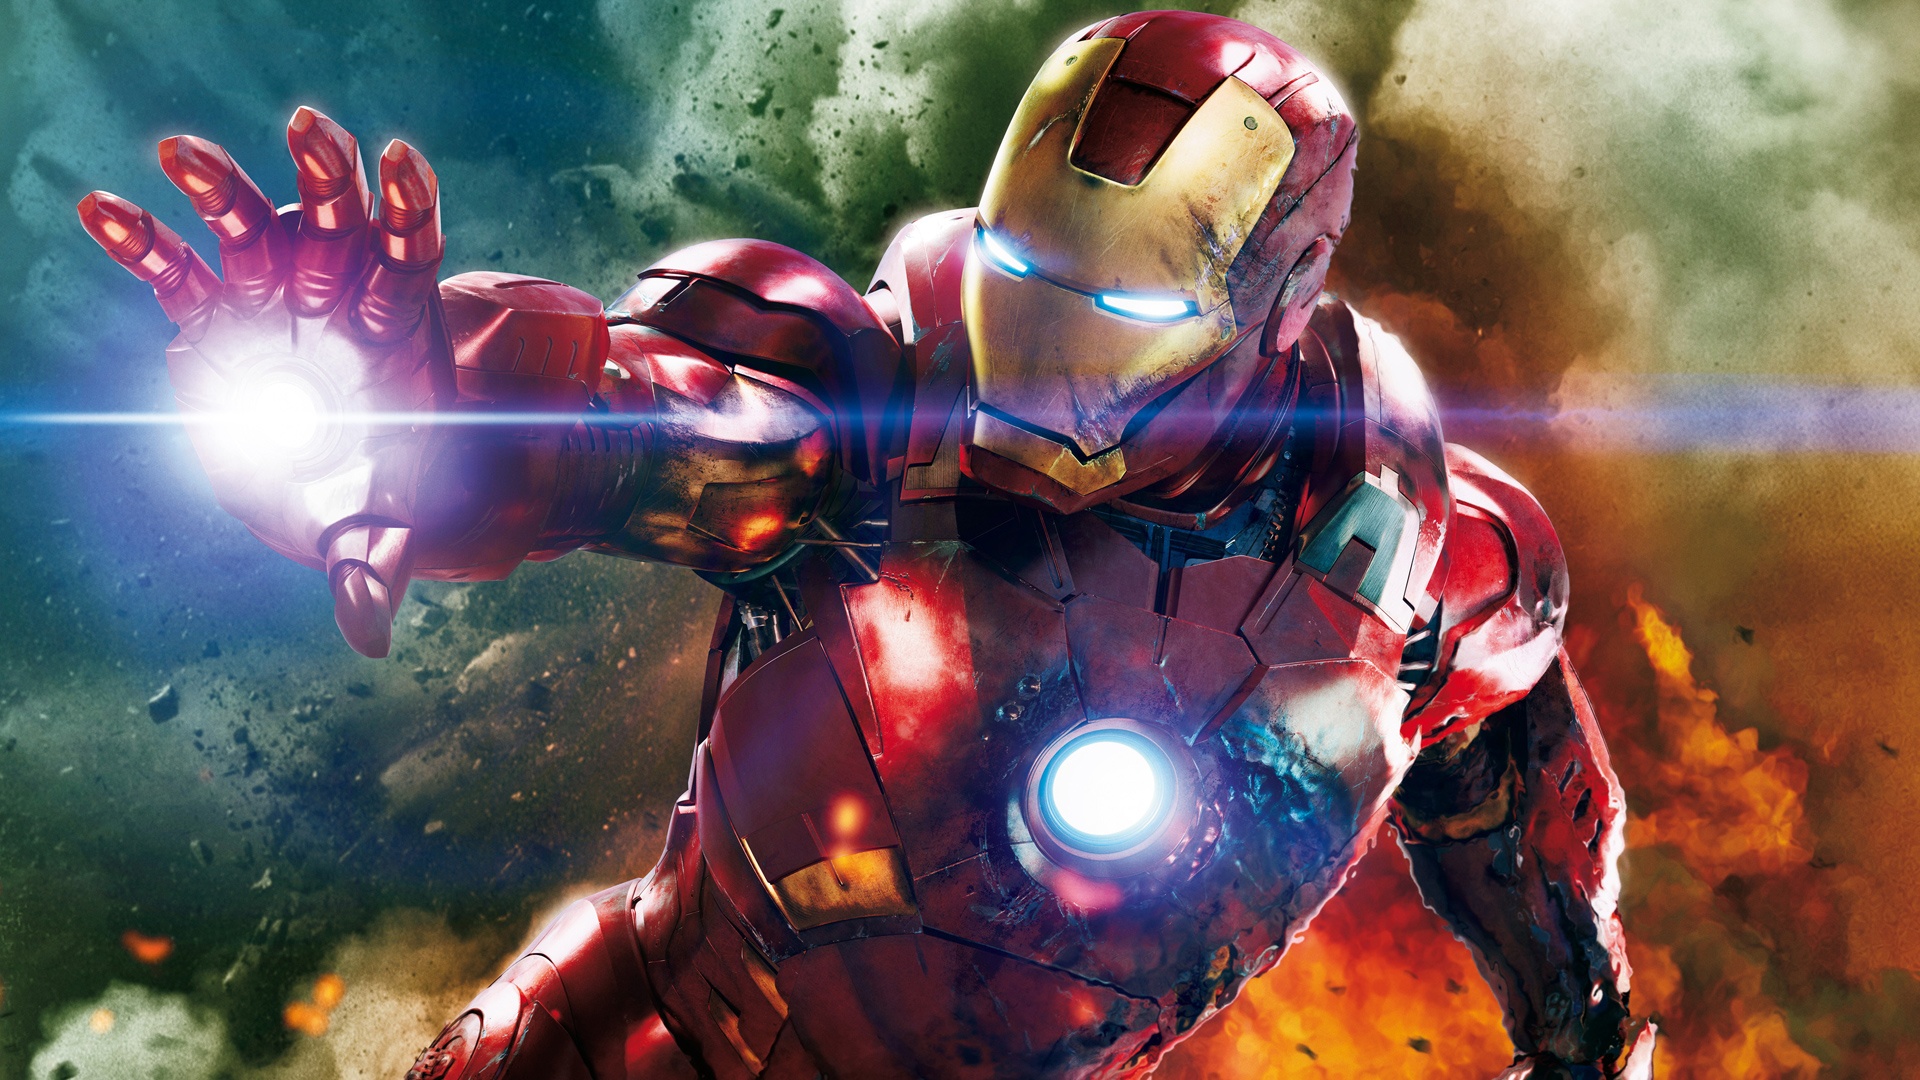 The Avengers Iron Man Wallpapers HD Wallpapers 1920x1080